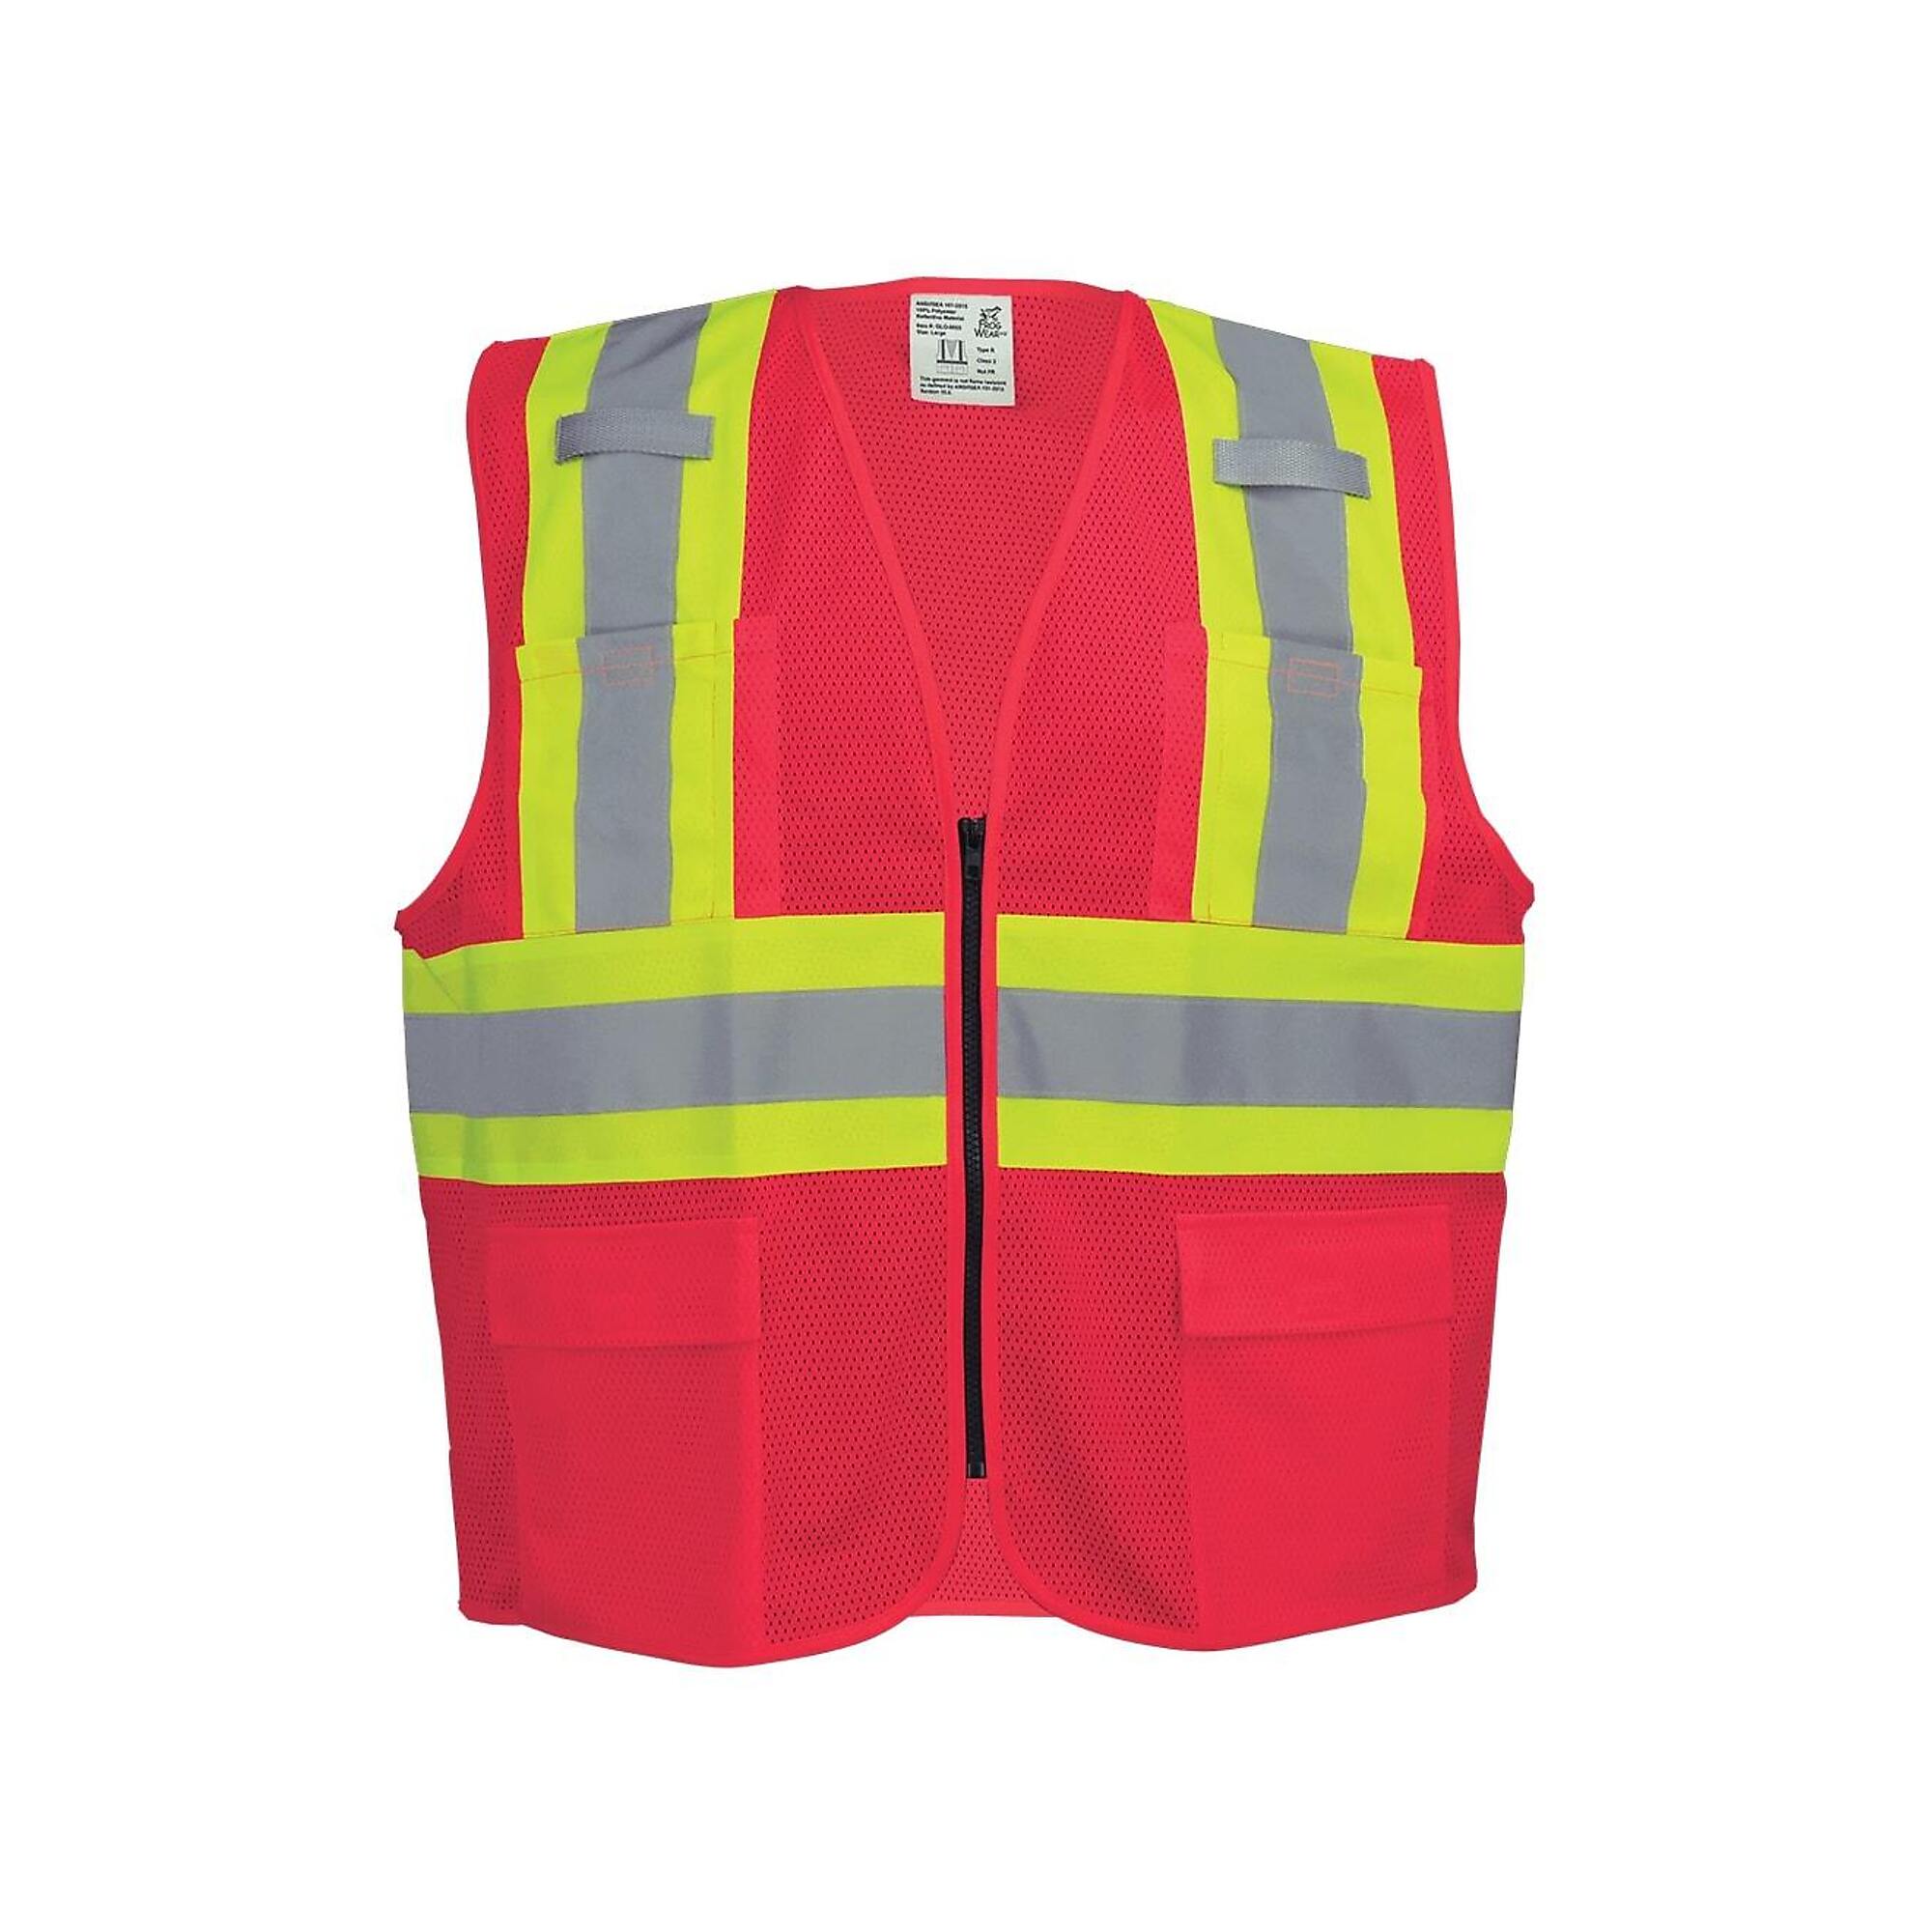 FrogWear, HV Red, Class 2 6 Pockets, Mesh Vest, Size XL, Color High-Visibility Red, Model GLO-0055-XL